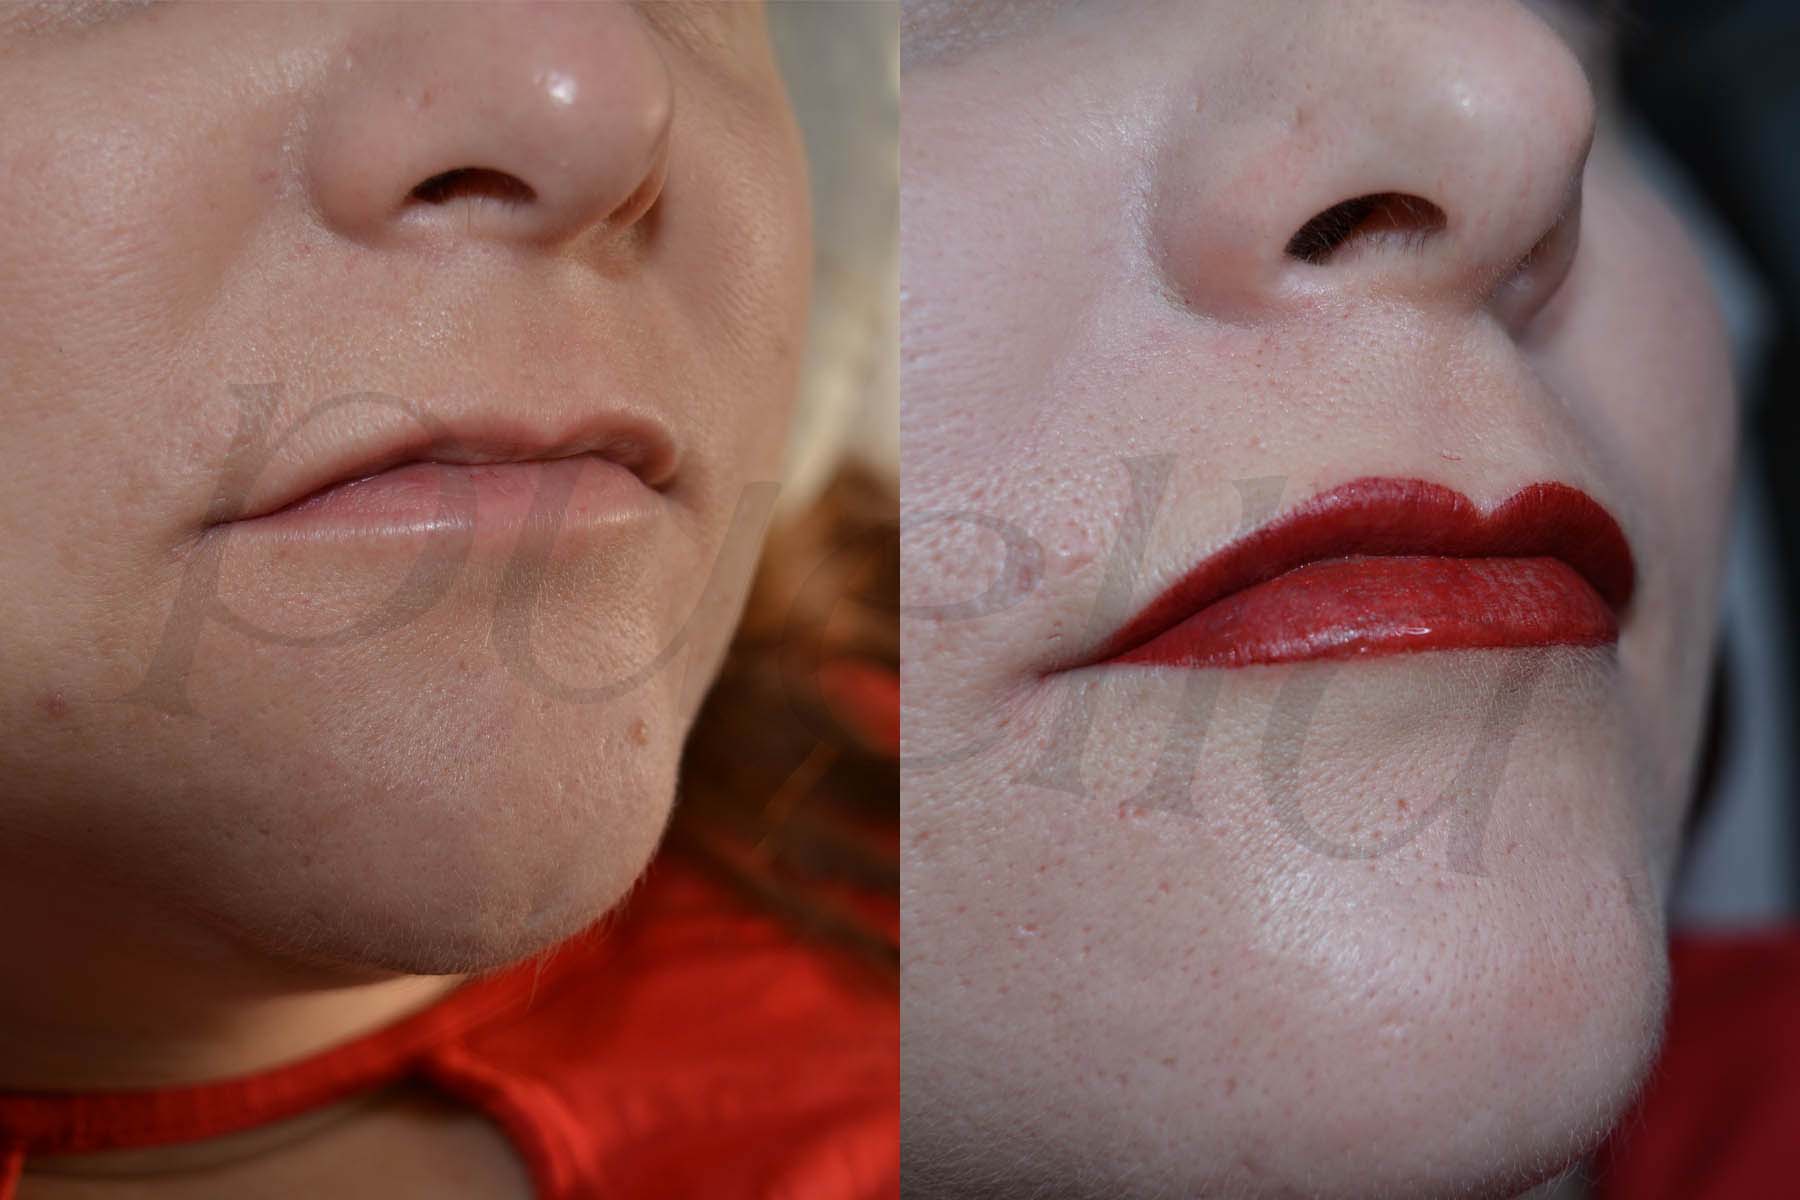 Permanent makeup by Puella Beauty - lips before and after